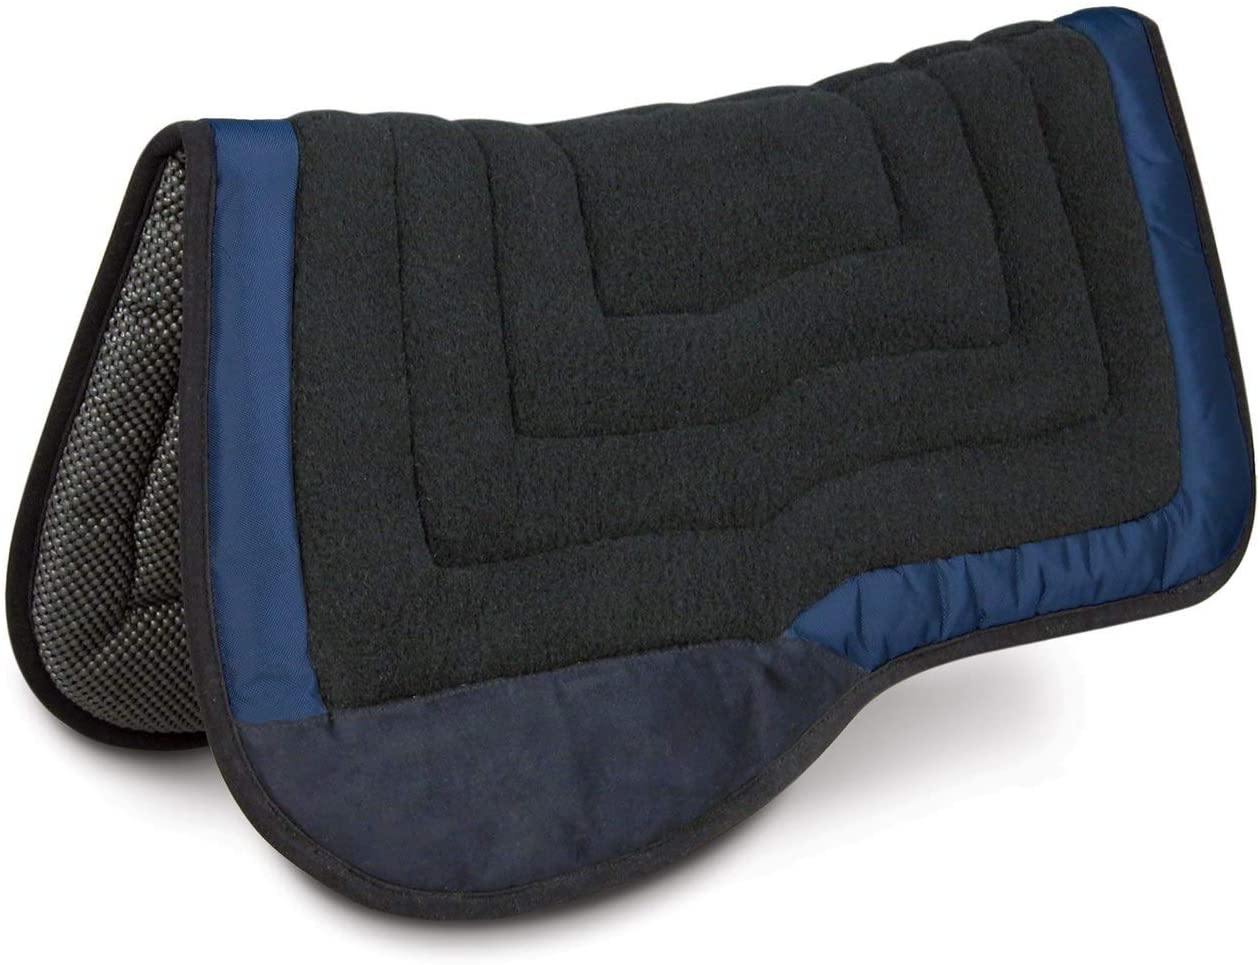 Other Western Saddle Pads